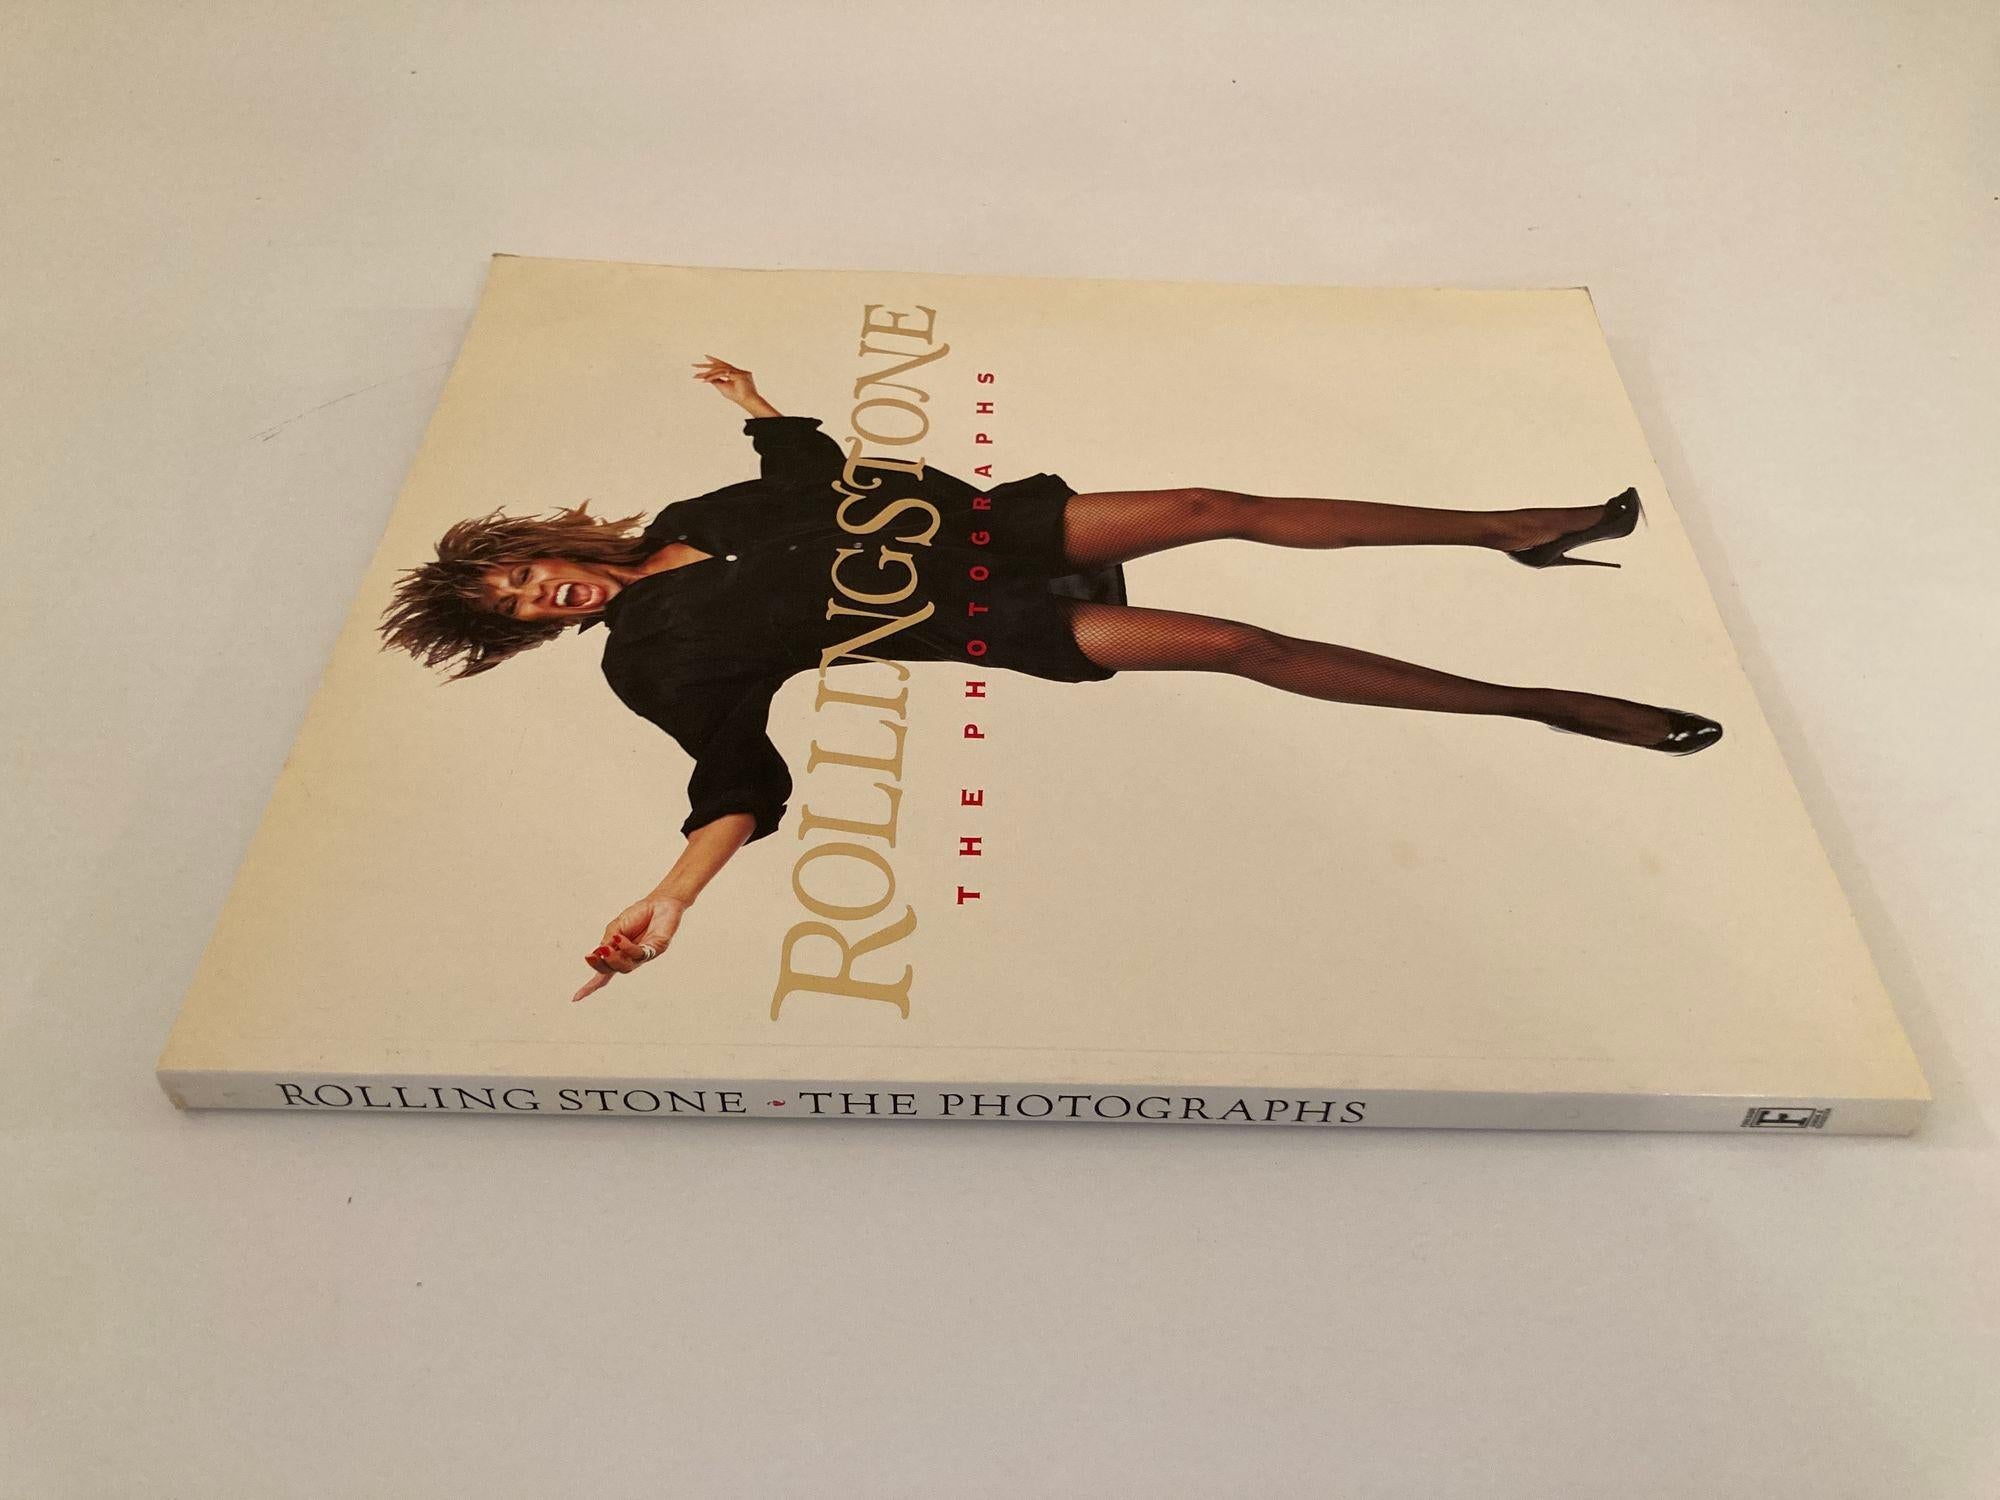 olling Stones the Photographs 1993 softcover. 1st edition, 1st printing.
Taken between 1967 and the present, these 150 pictures by 35 photographers are reprinted from Rolling Stone.
Tina Turner is one of the famous faces of rock.
This great